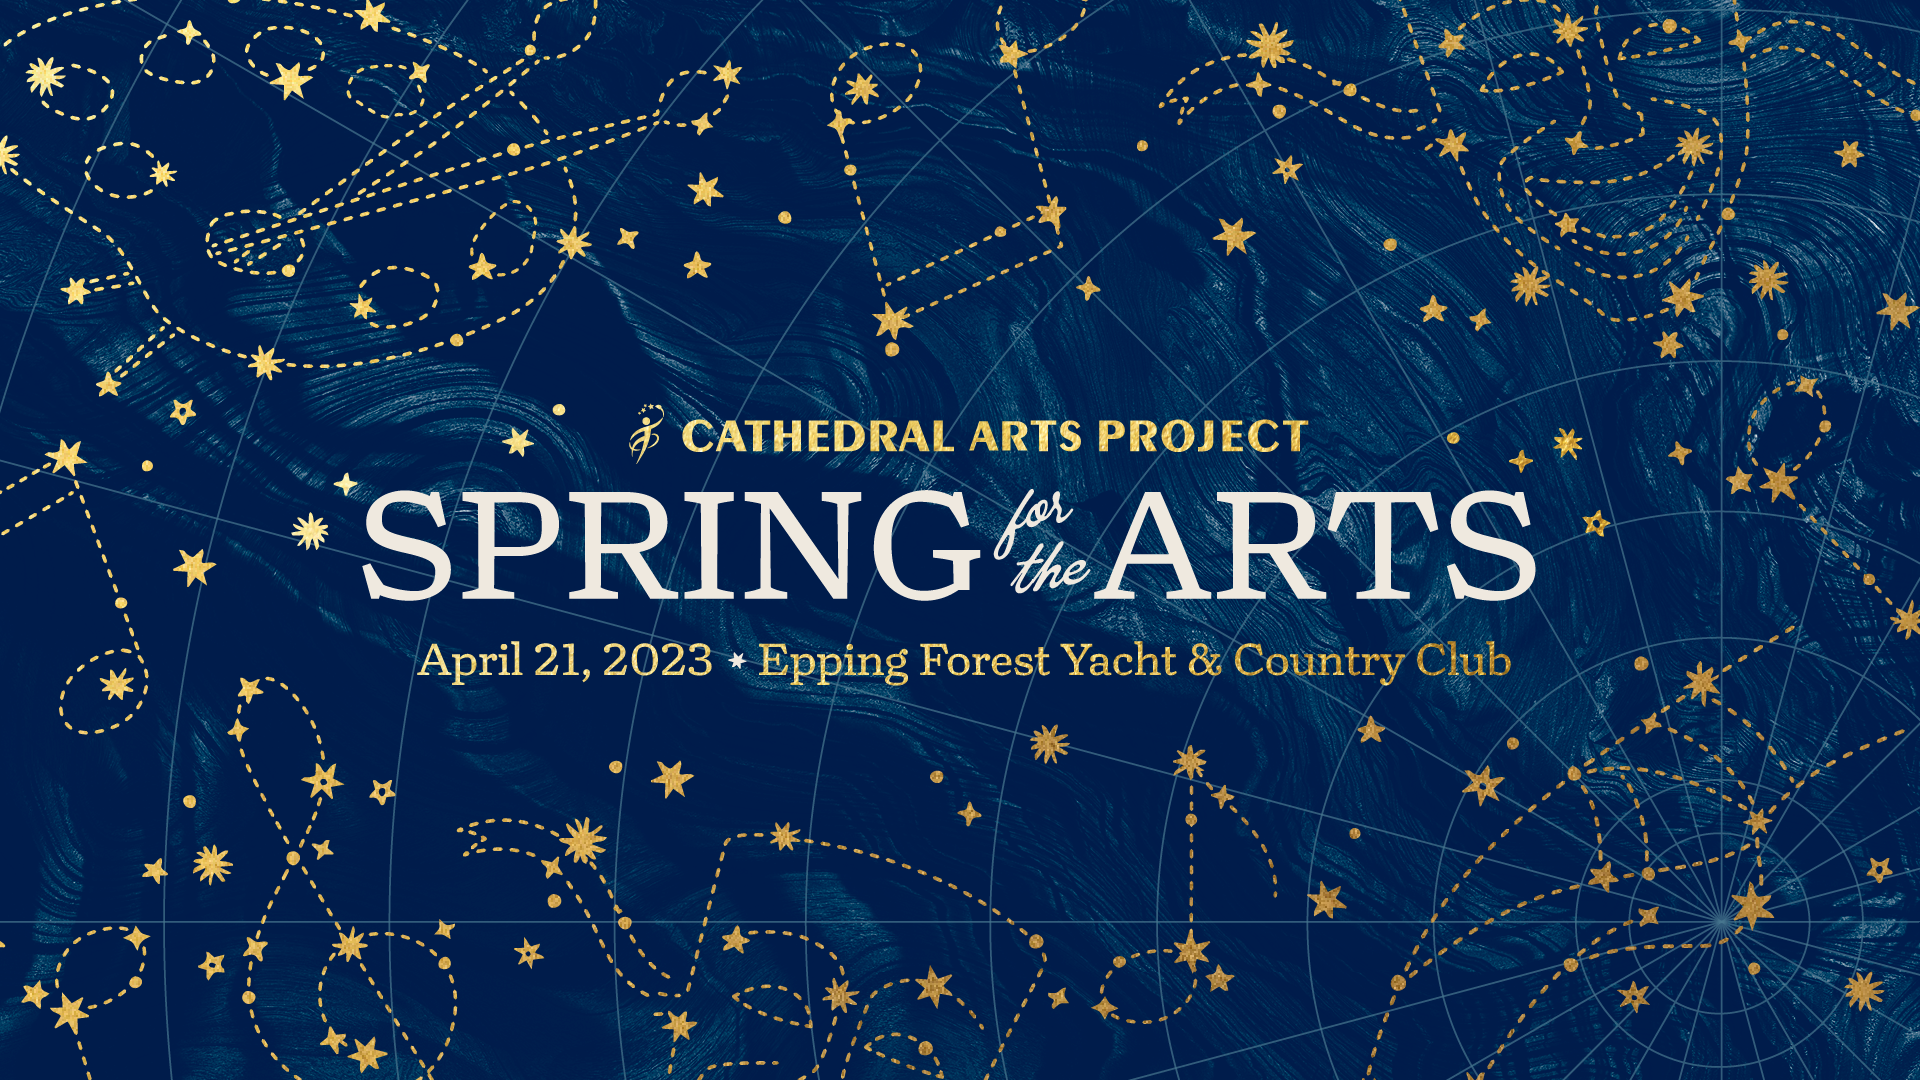 Spring for the Arts - Cathedral Arts Project